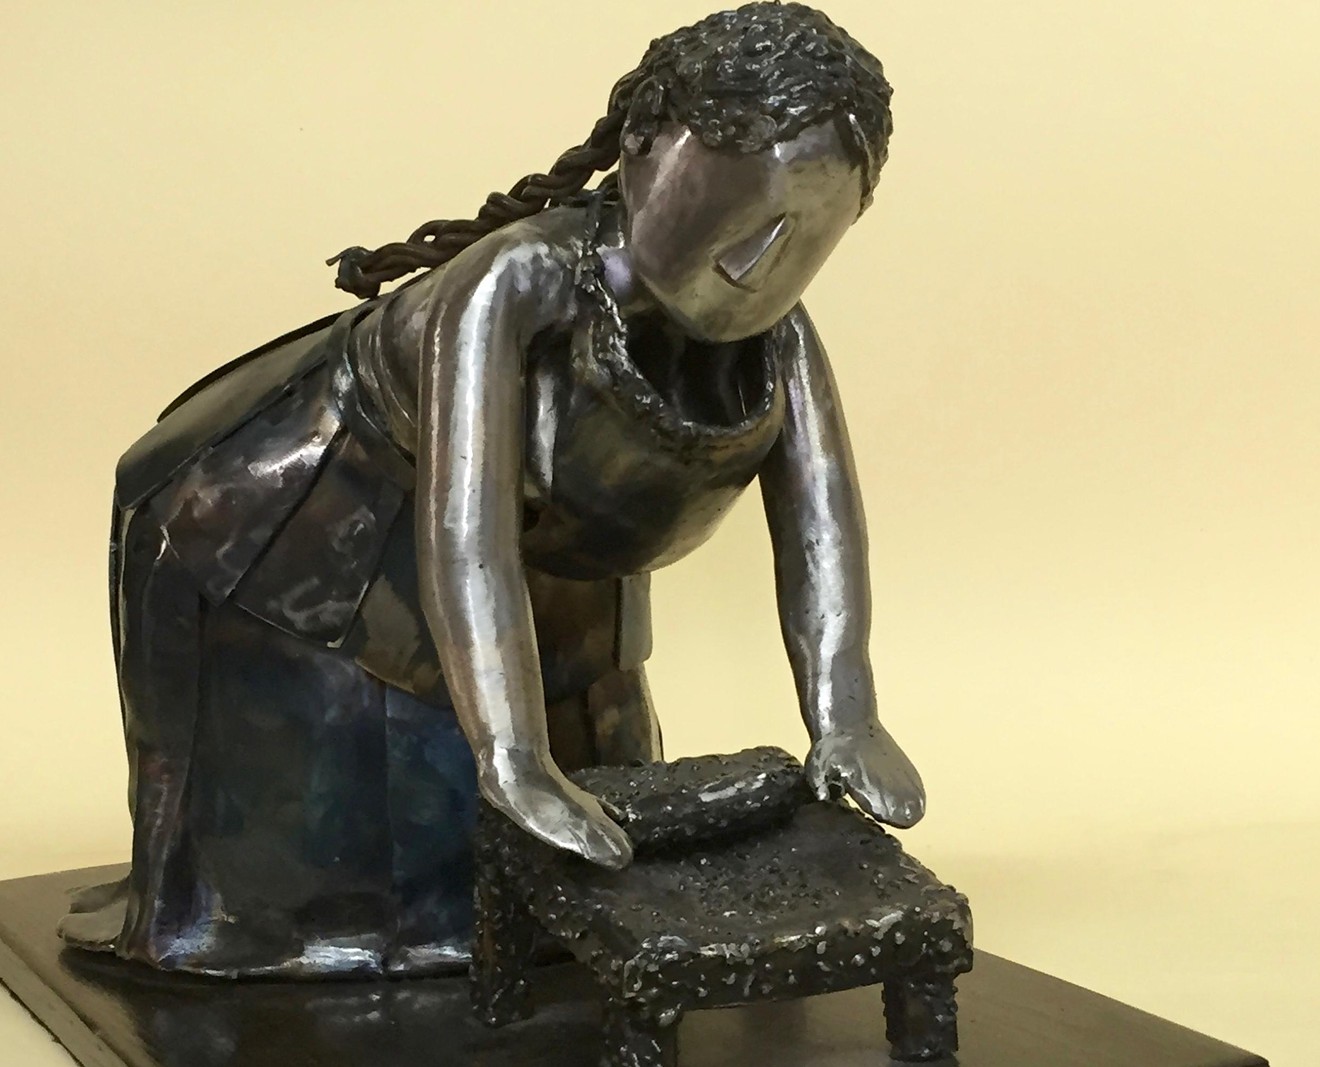 Sculpture by Alfredo Cardenas, whose work will be on display in Storytelling in Sculpture, part of a series of exhibitions called Generations.